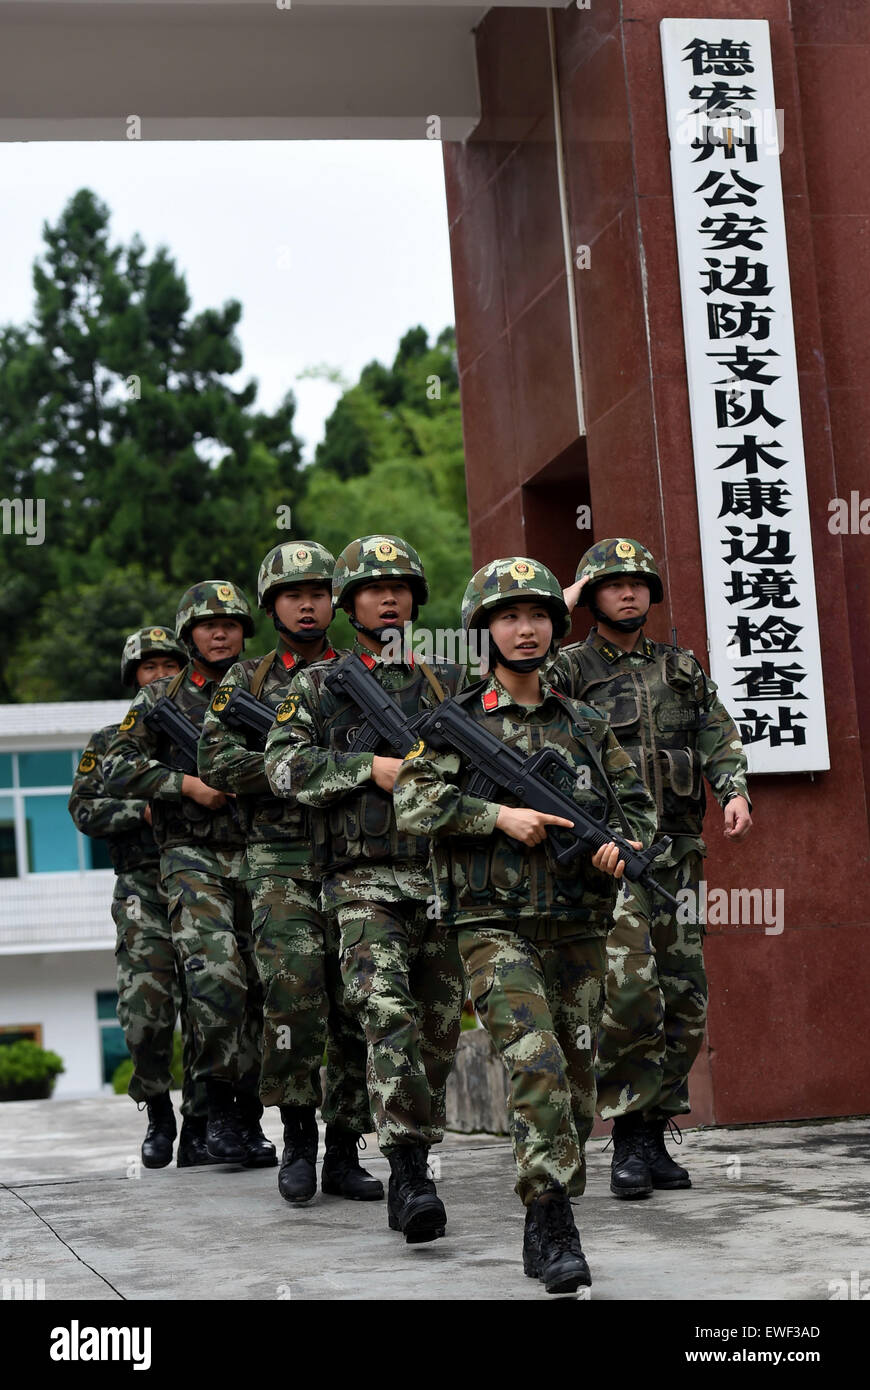 (150625) -- DEHONG, June 25, 2015 (Xinhua) -- Zhang Liu (front) and her comrades walk in line at the gate of the border checkpoint of Mukang in Dehong Dai-Jingpo Autonomous Prefecture, southwest China's Yunnan Province, June 24, 2015. Born in 1995, Zhang Liu became an anti-drug soldier in border checkpoint of Mukang in 2013.  Grown up in an affluent family in central China's Hunan Province, Zhang said that being a soldier had always been her dream, which drove her to join the army after graduating from high school. Being a front line anti-drug force, the border checkpoint of Mukang has capture Stock Photo